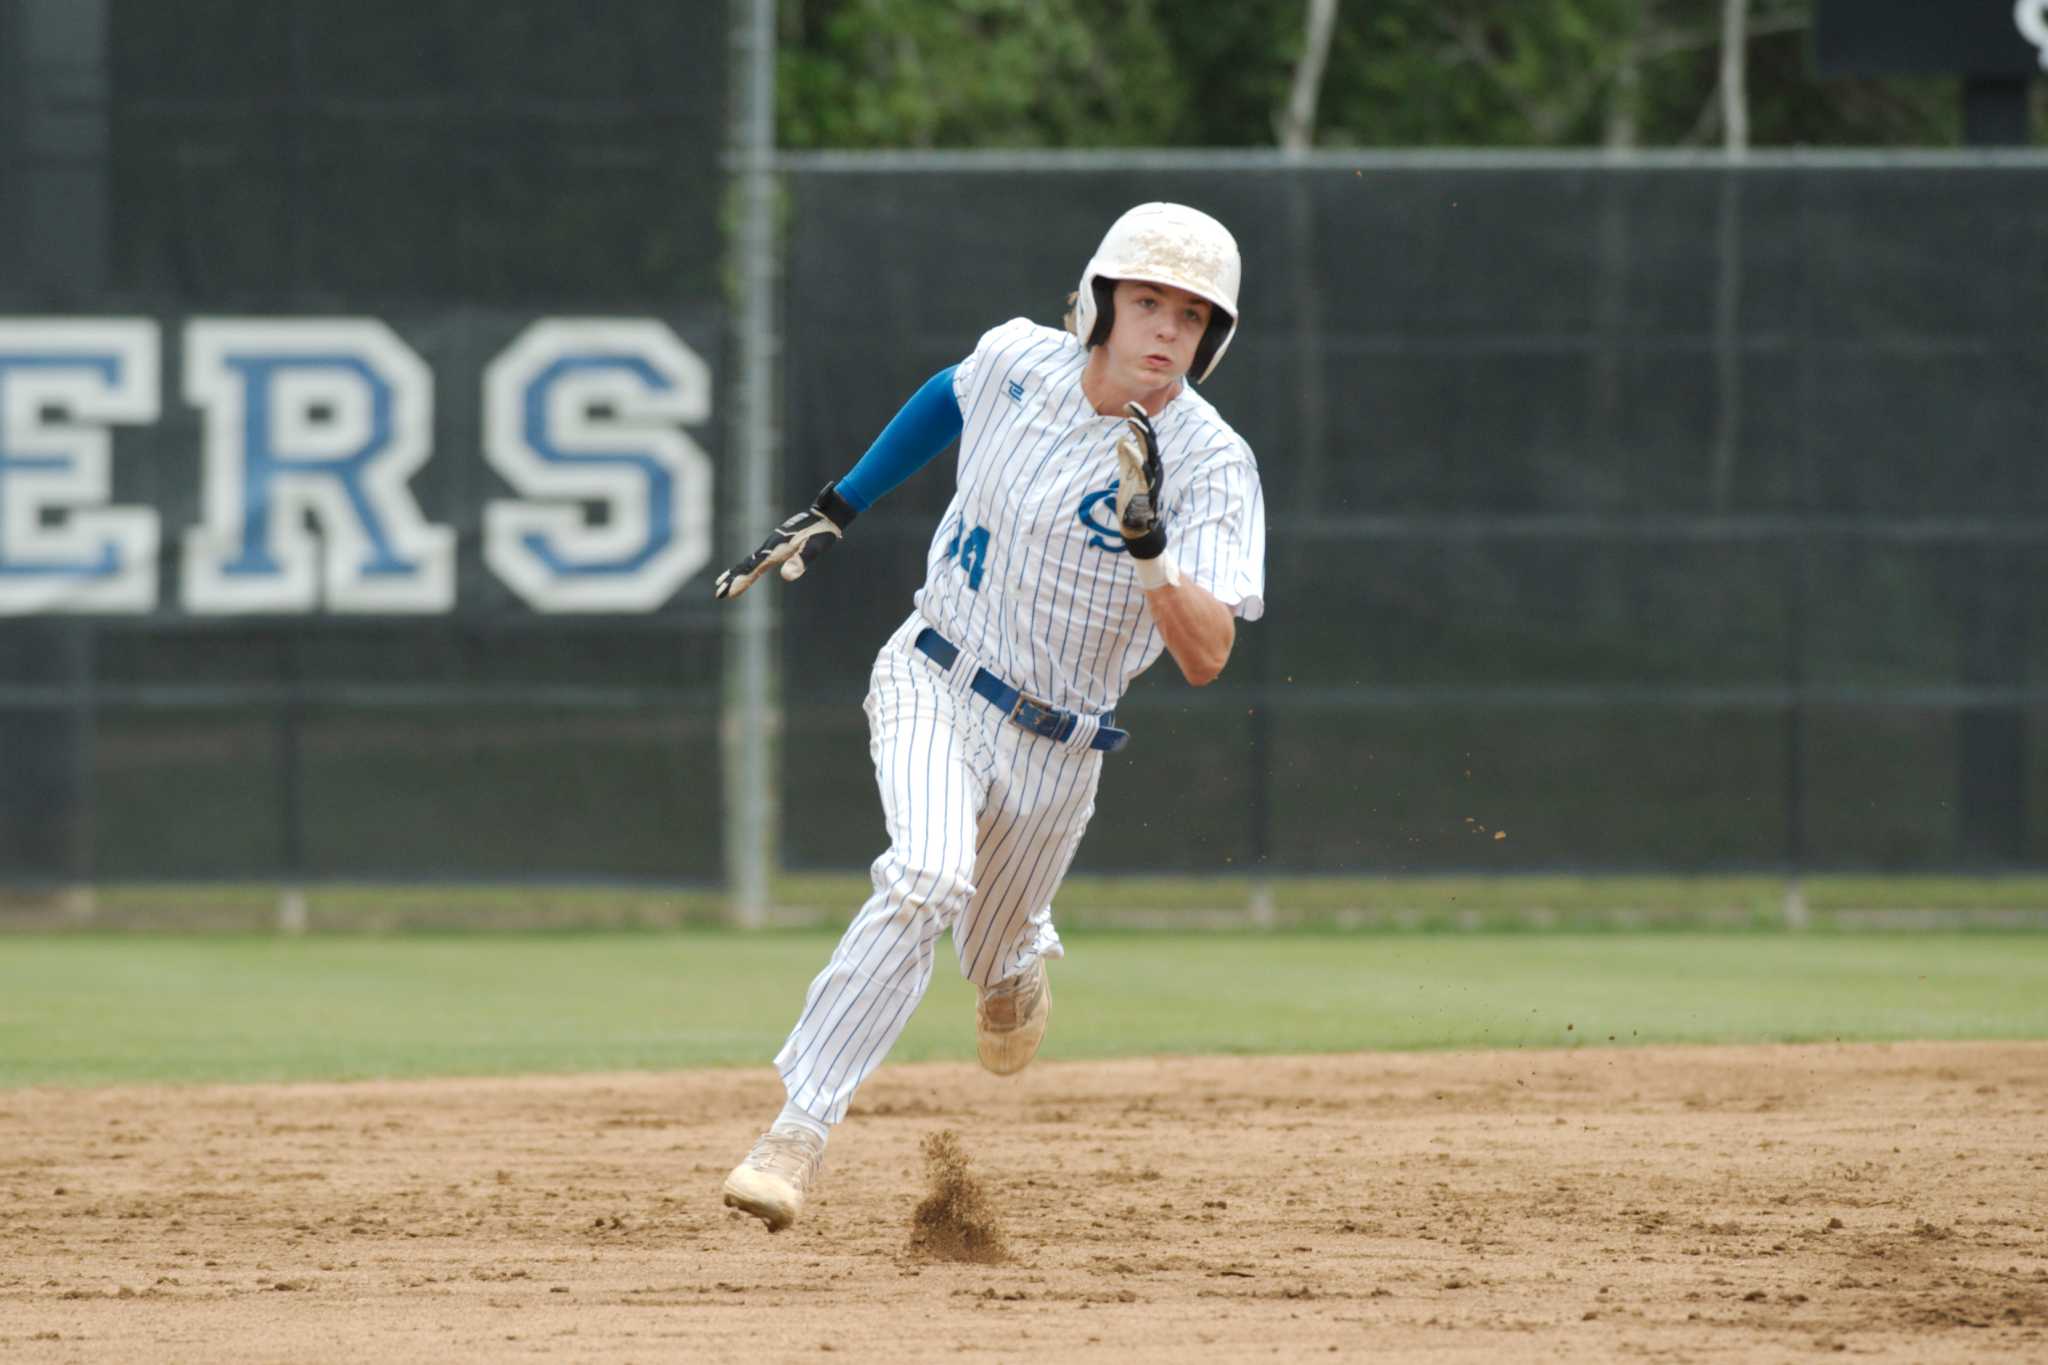 Houston baseball Clear Springs thriving in playoffs with attitude